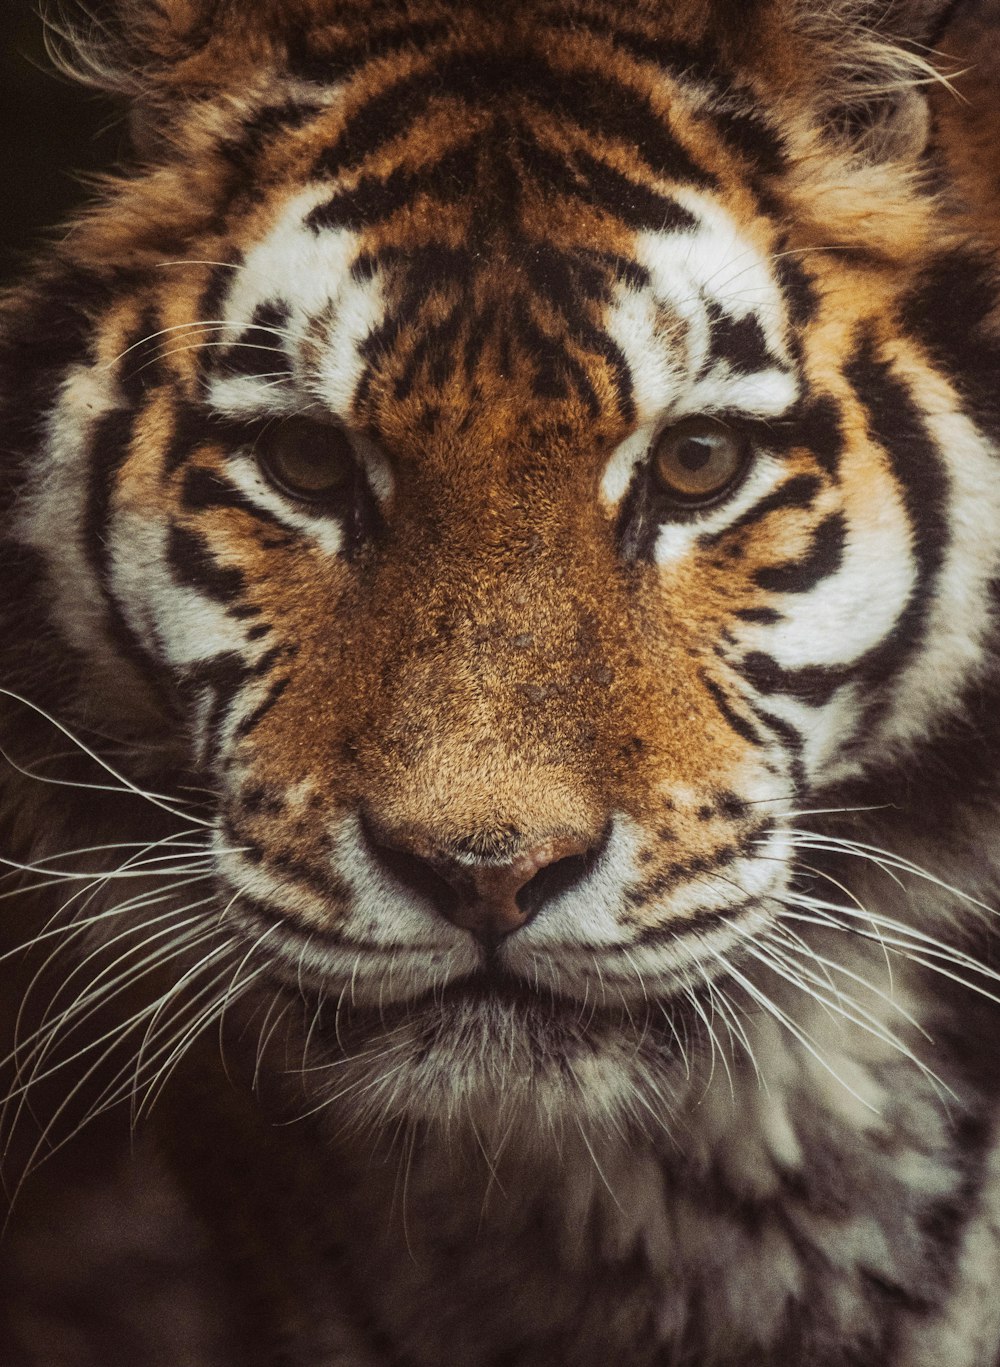 a close up of a tiger's face with a blurry background